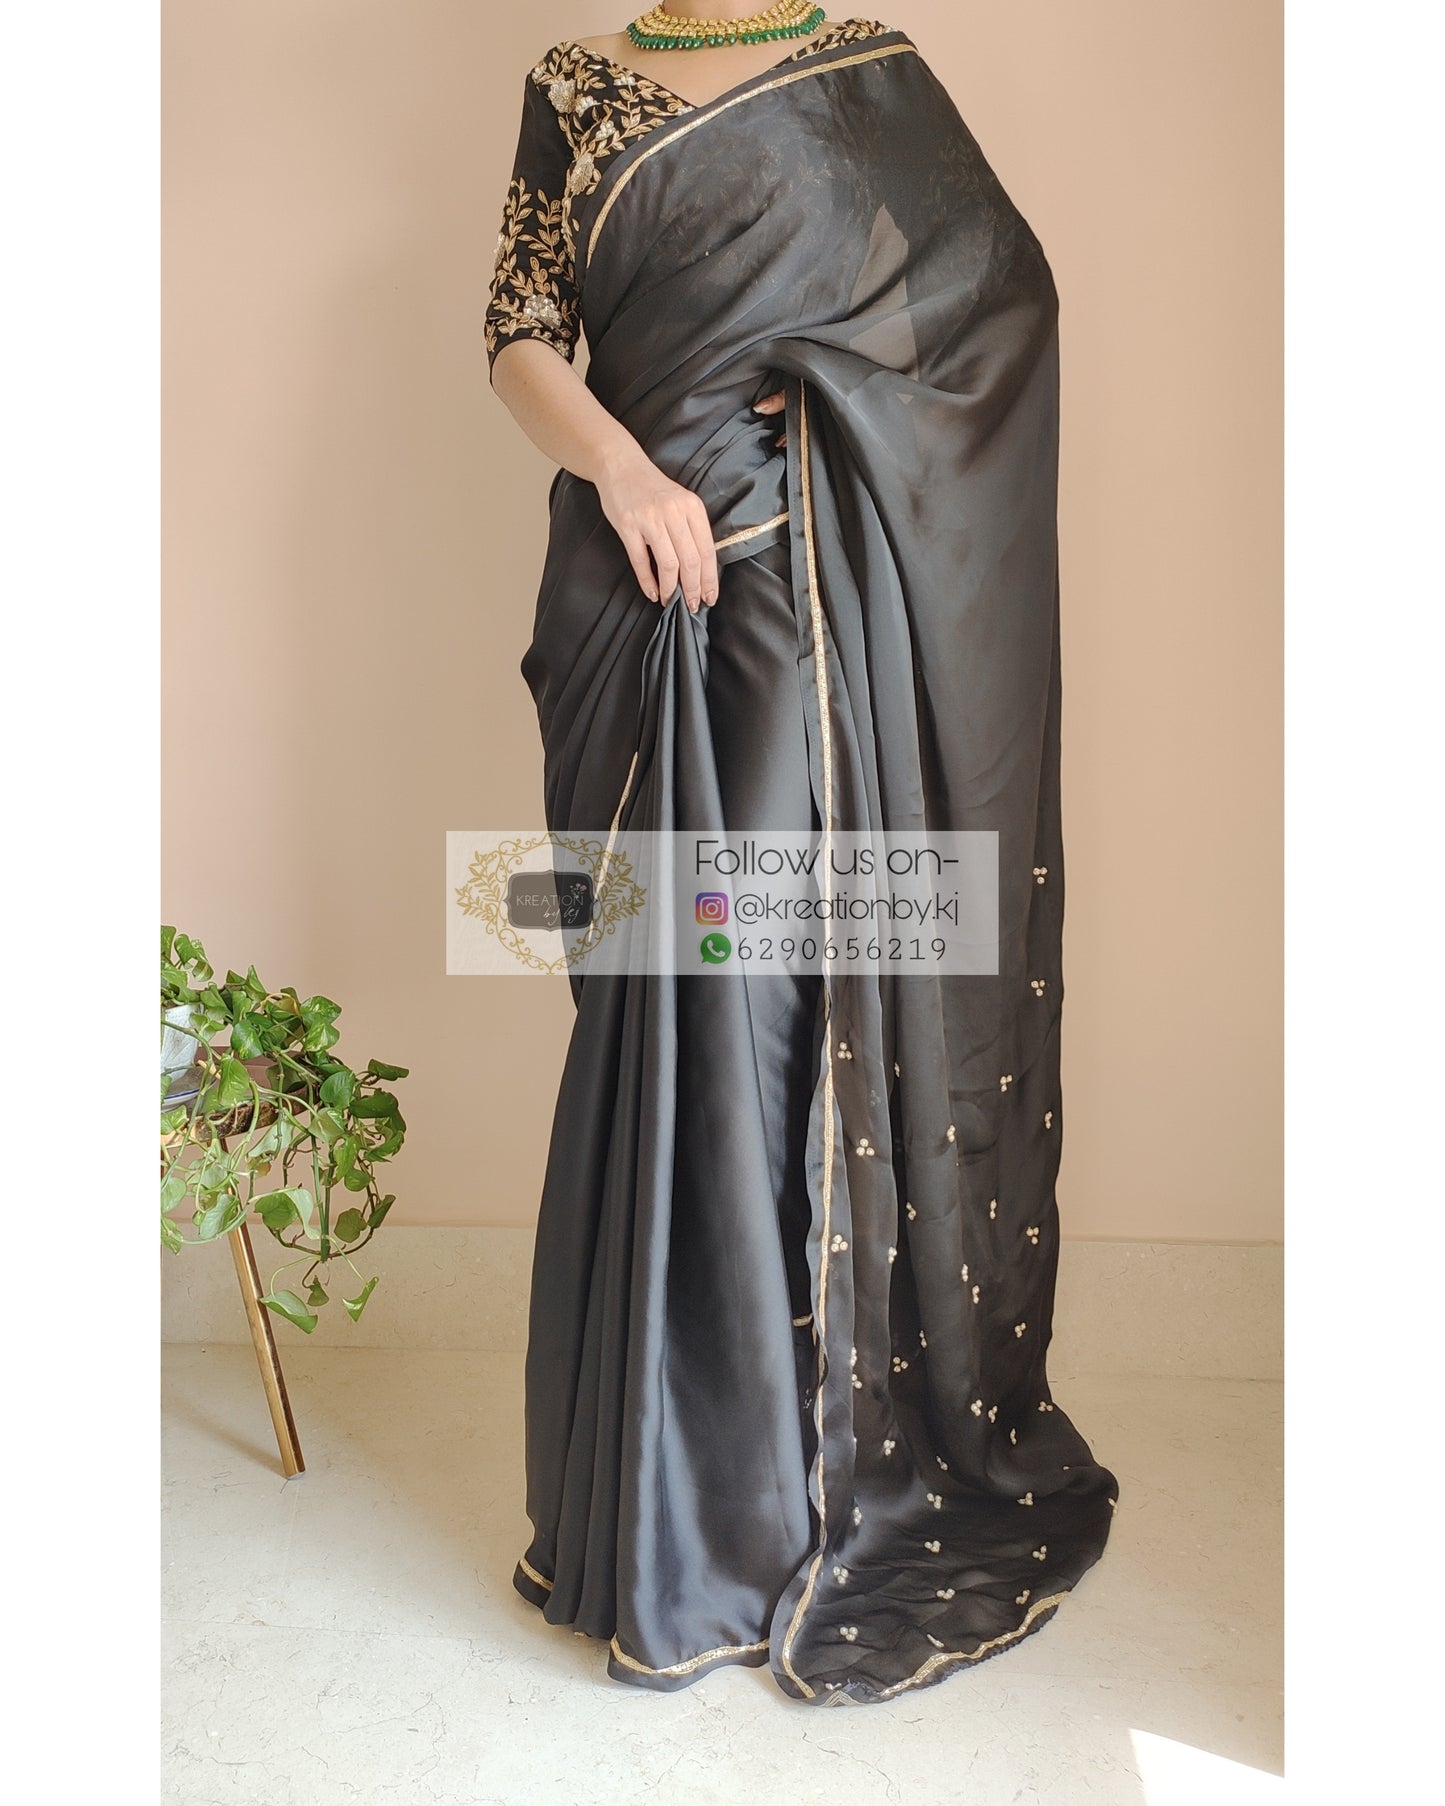 Black Crepe Silk Saree With Heavily Embroidered Blouse - kreationbykj